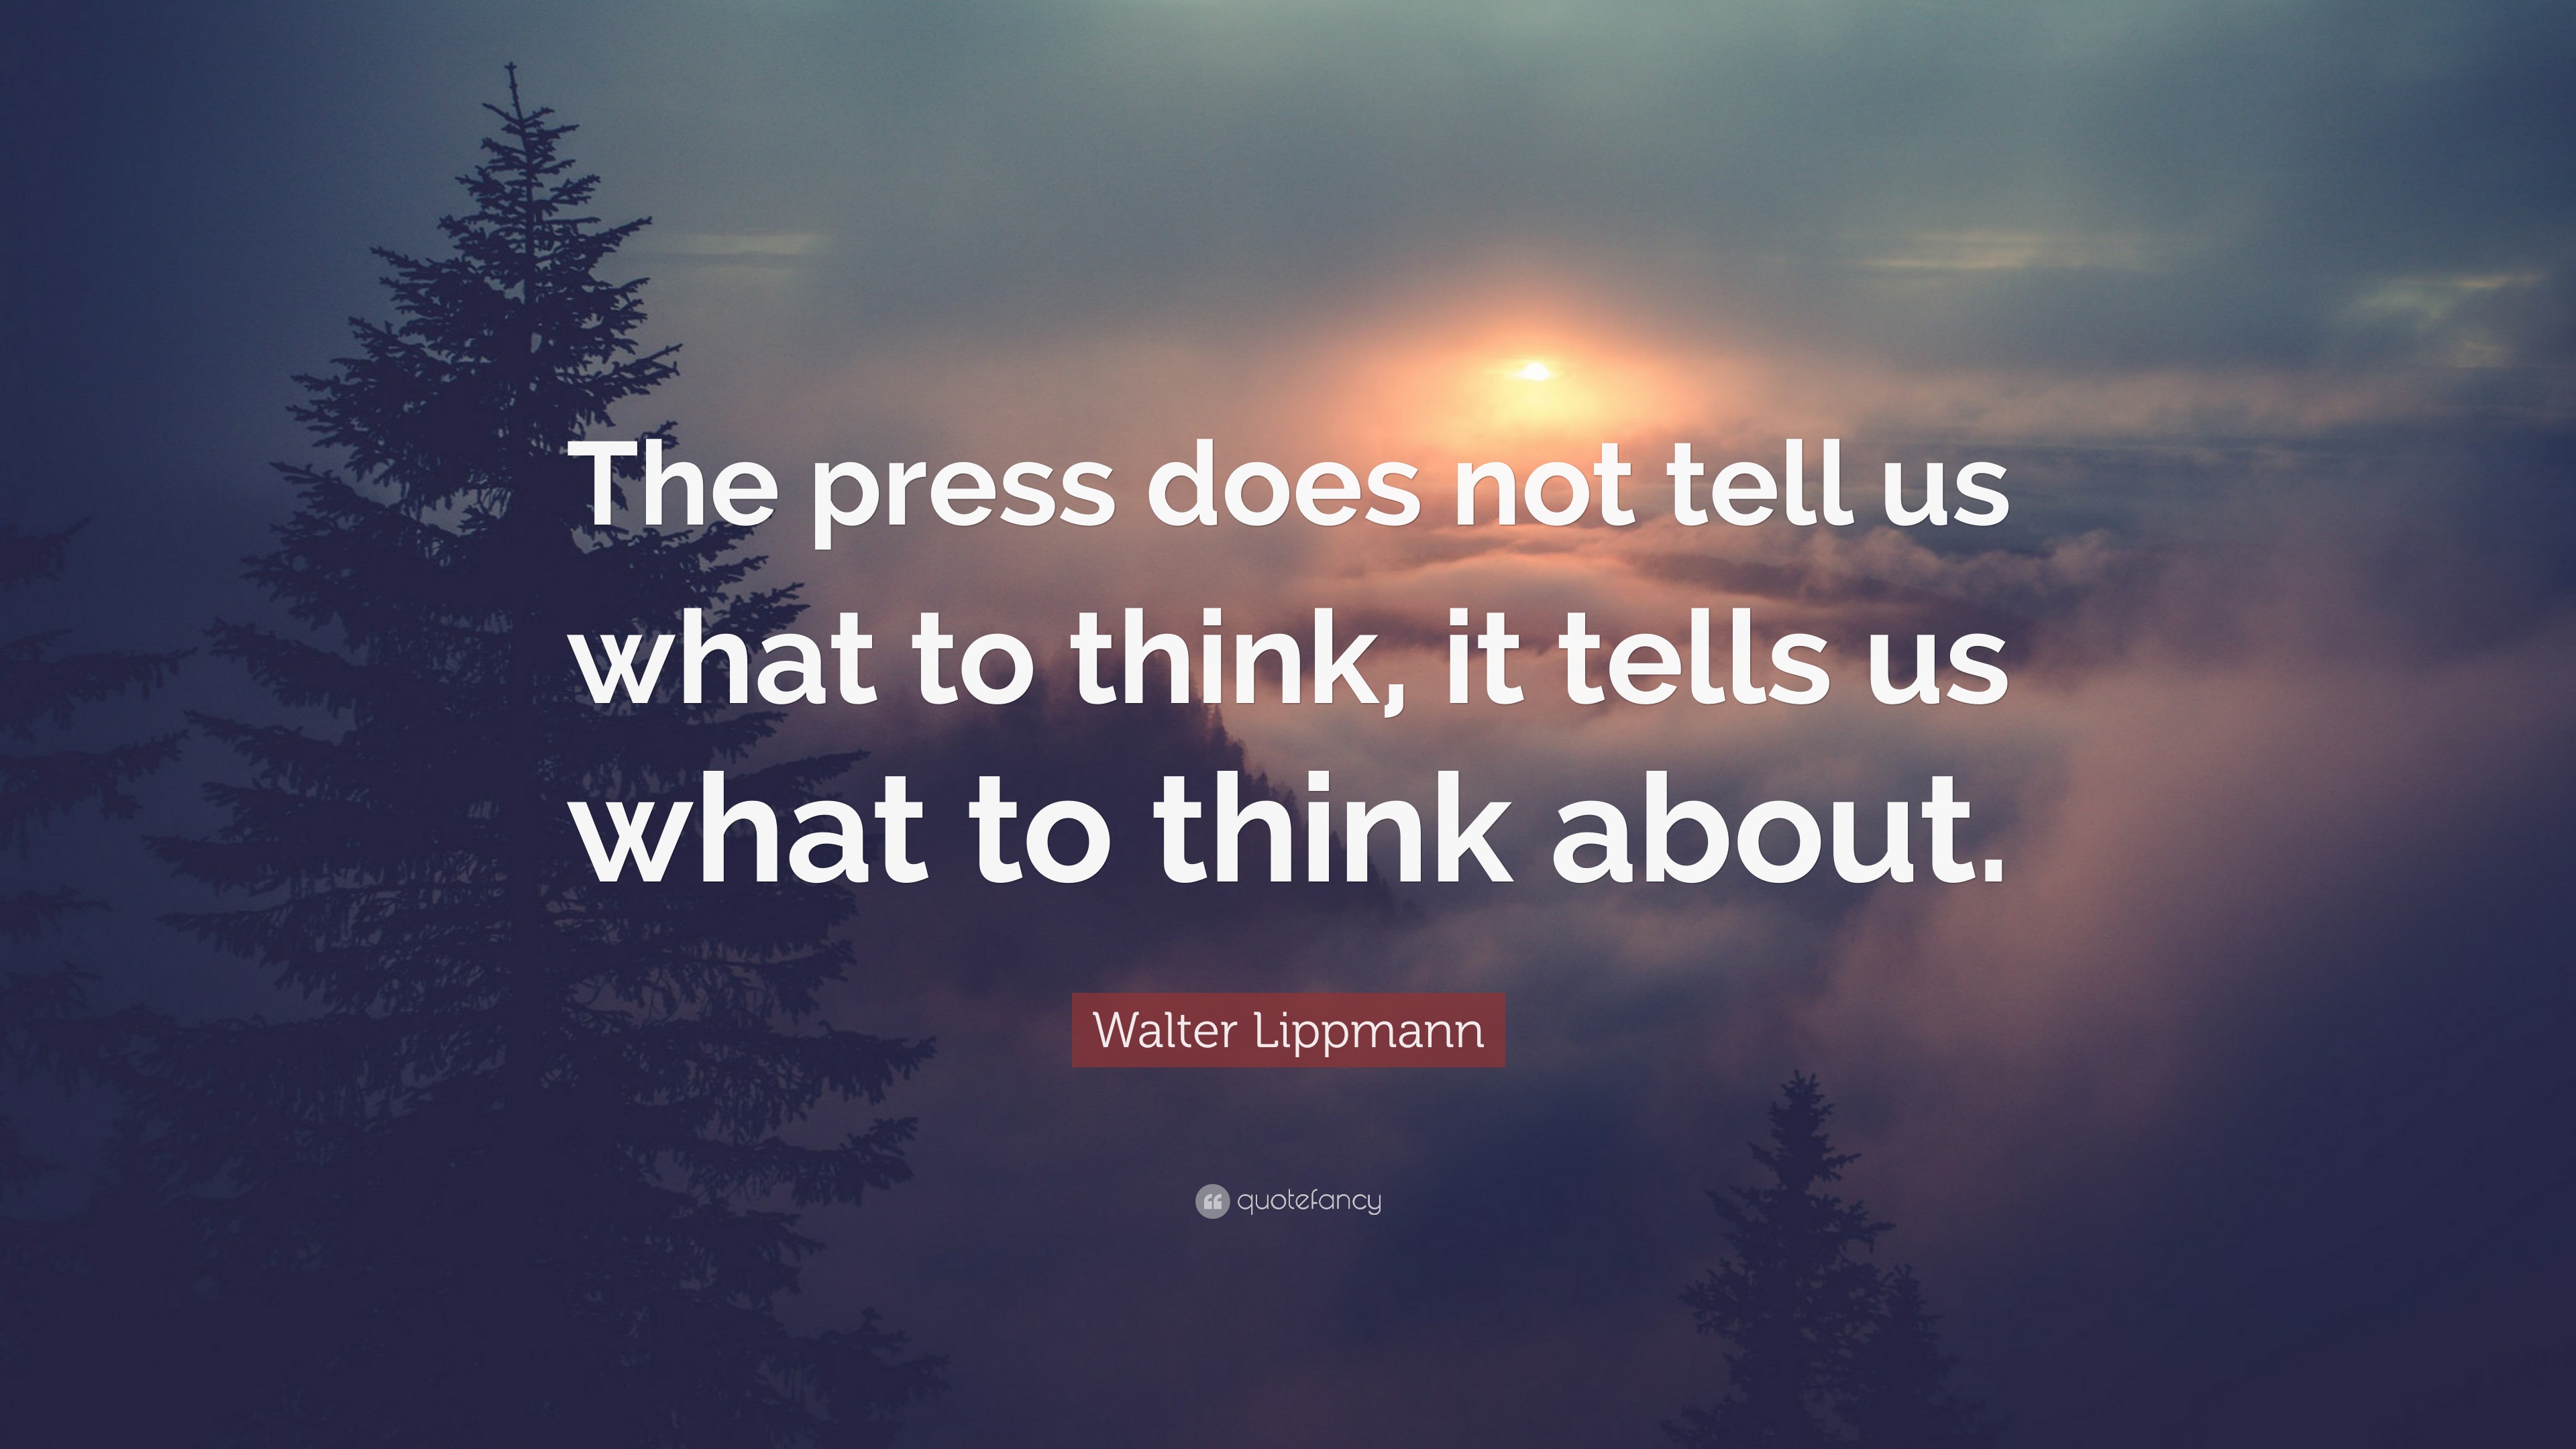 Walter Lippmann Quote: “The press does not tell us what to think, it ...